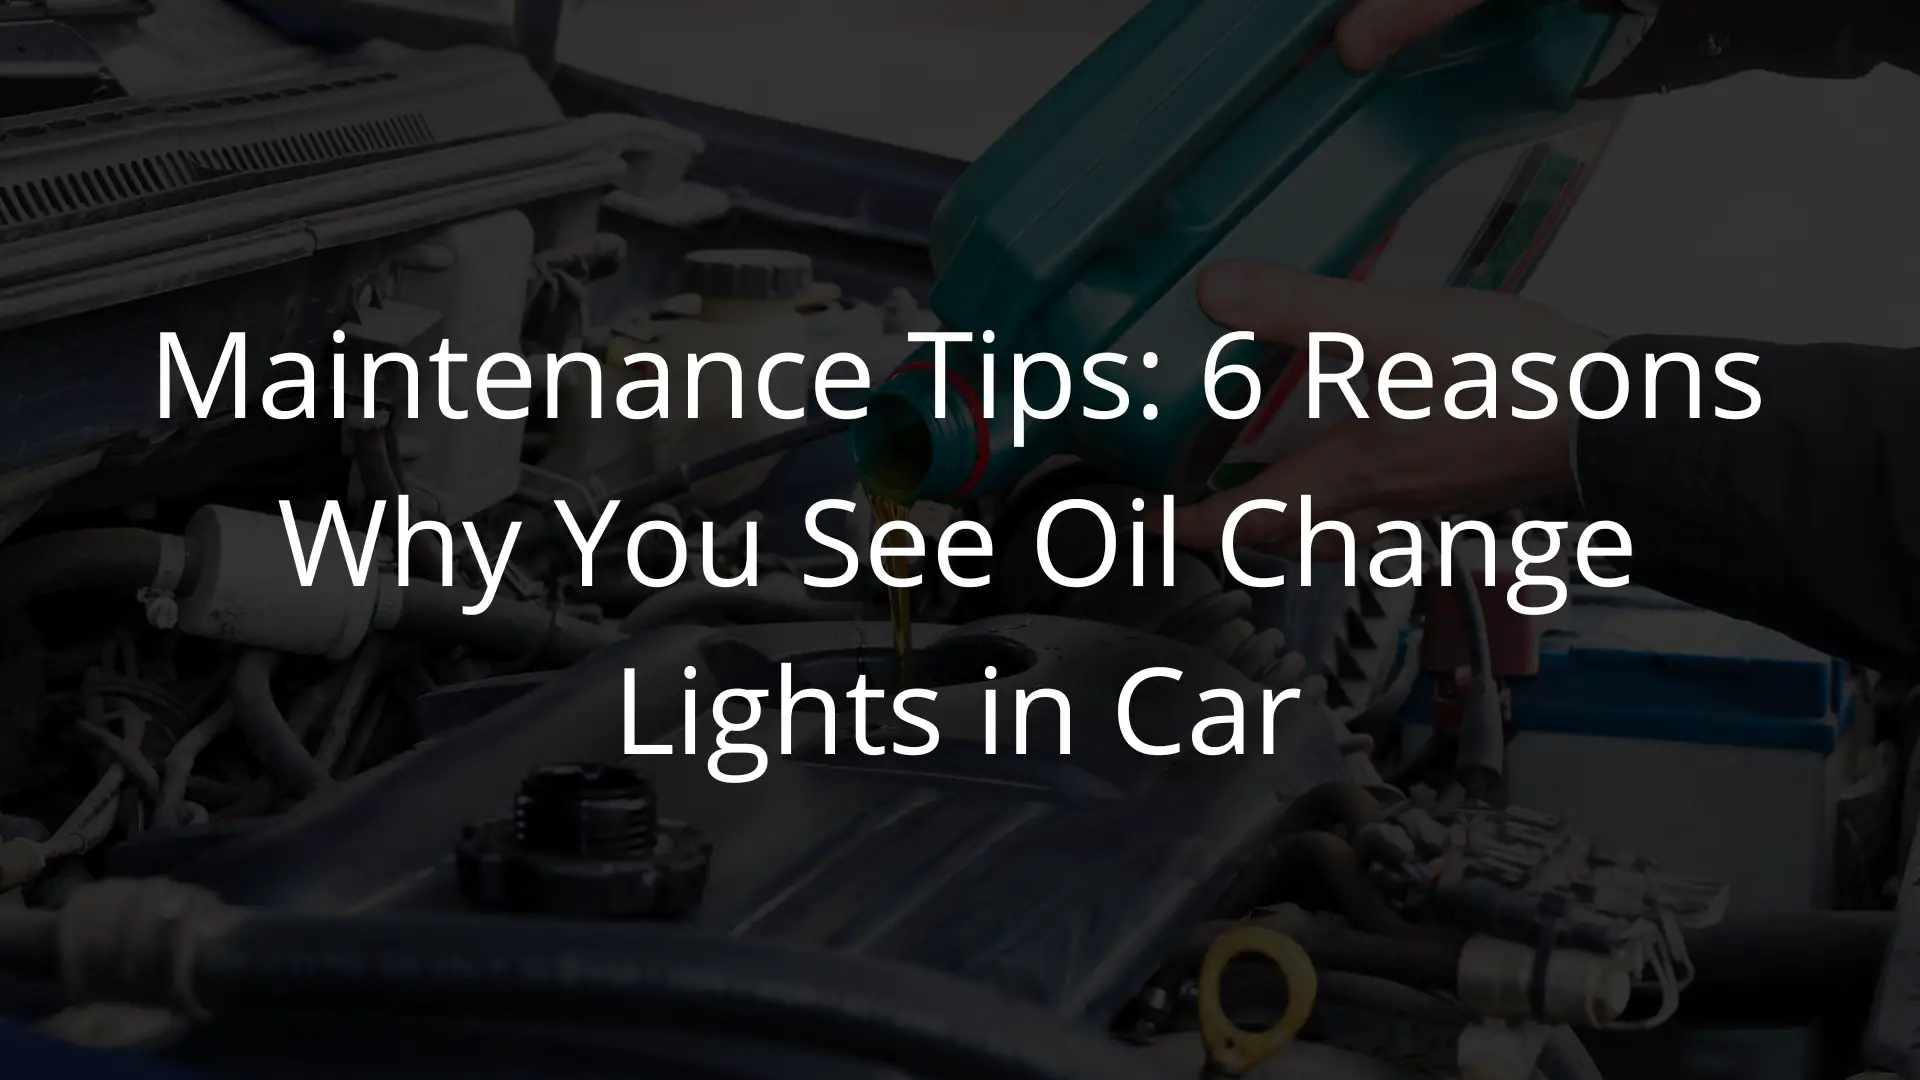 6 Reasons Why You See Oil Change Lights in a Car